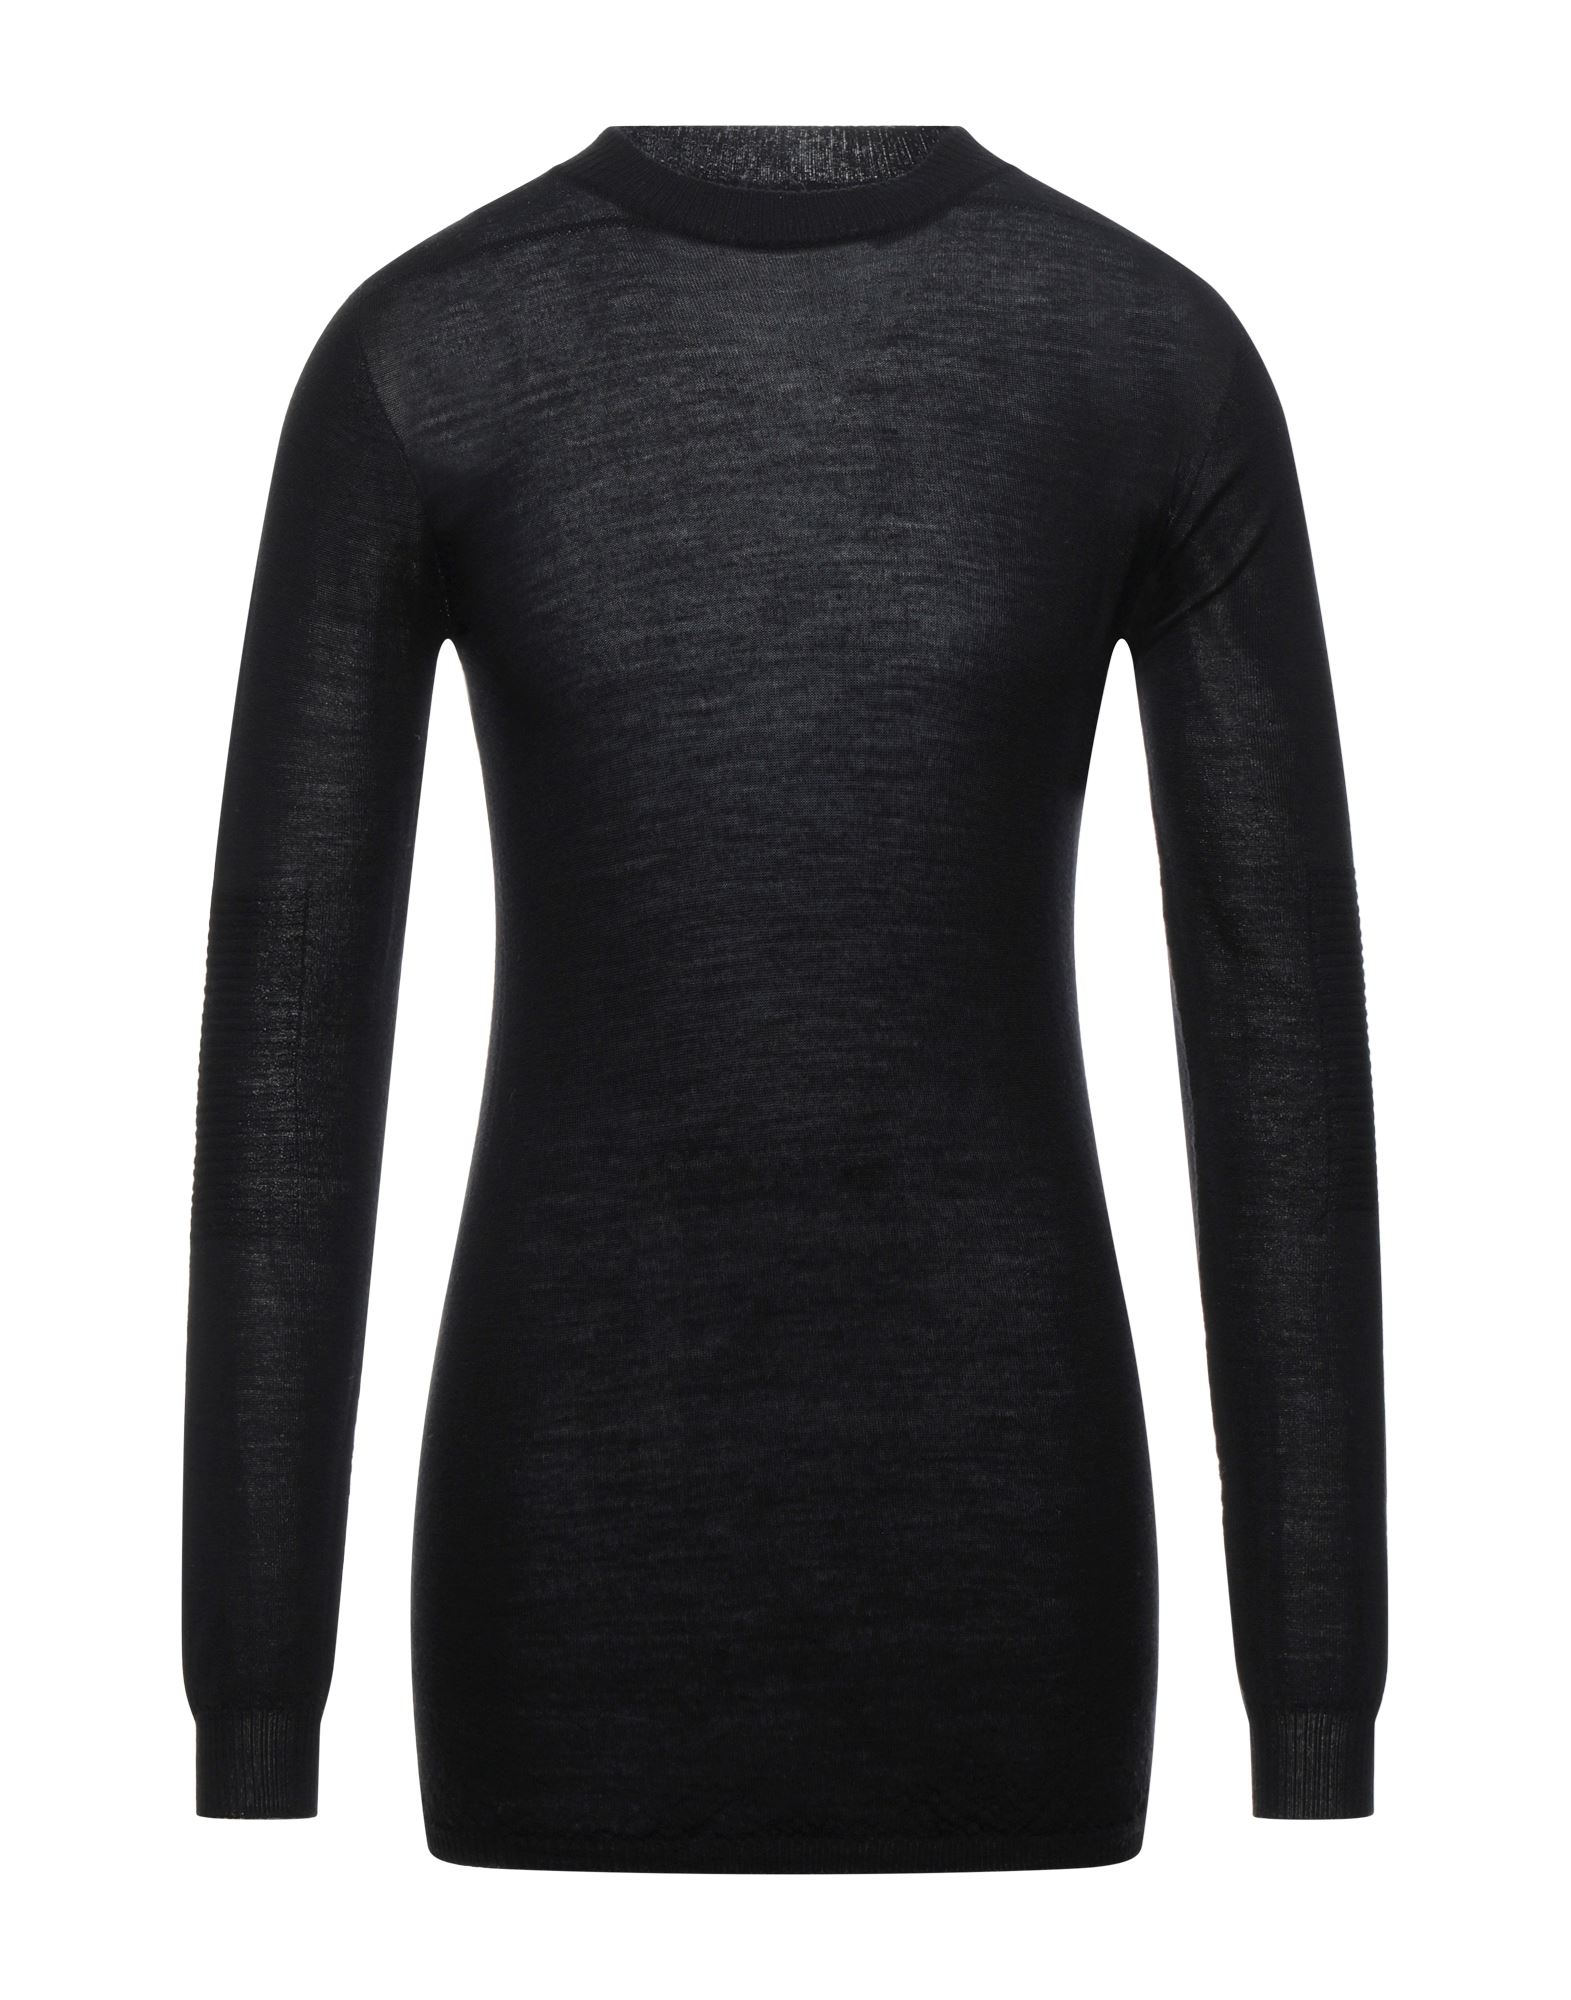 RICK OWENS SWEATERS,14120089GN 4